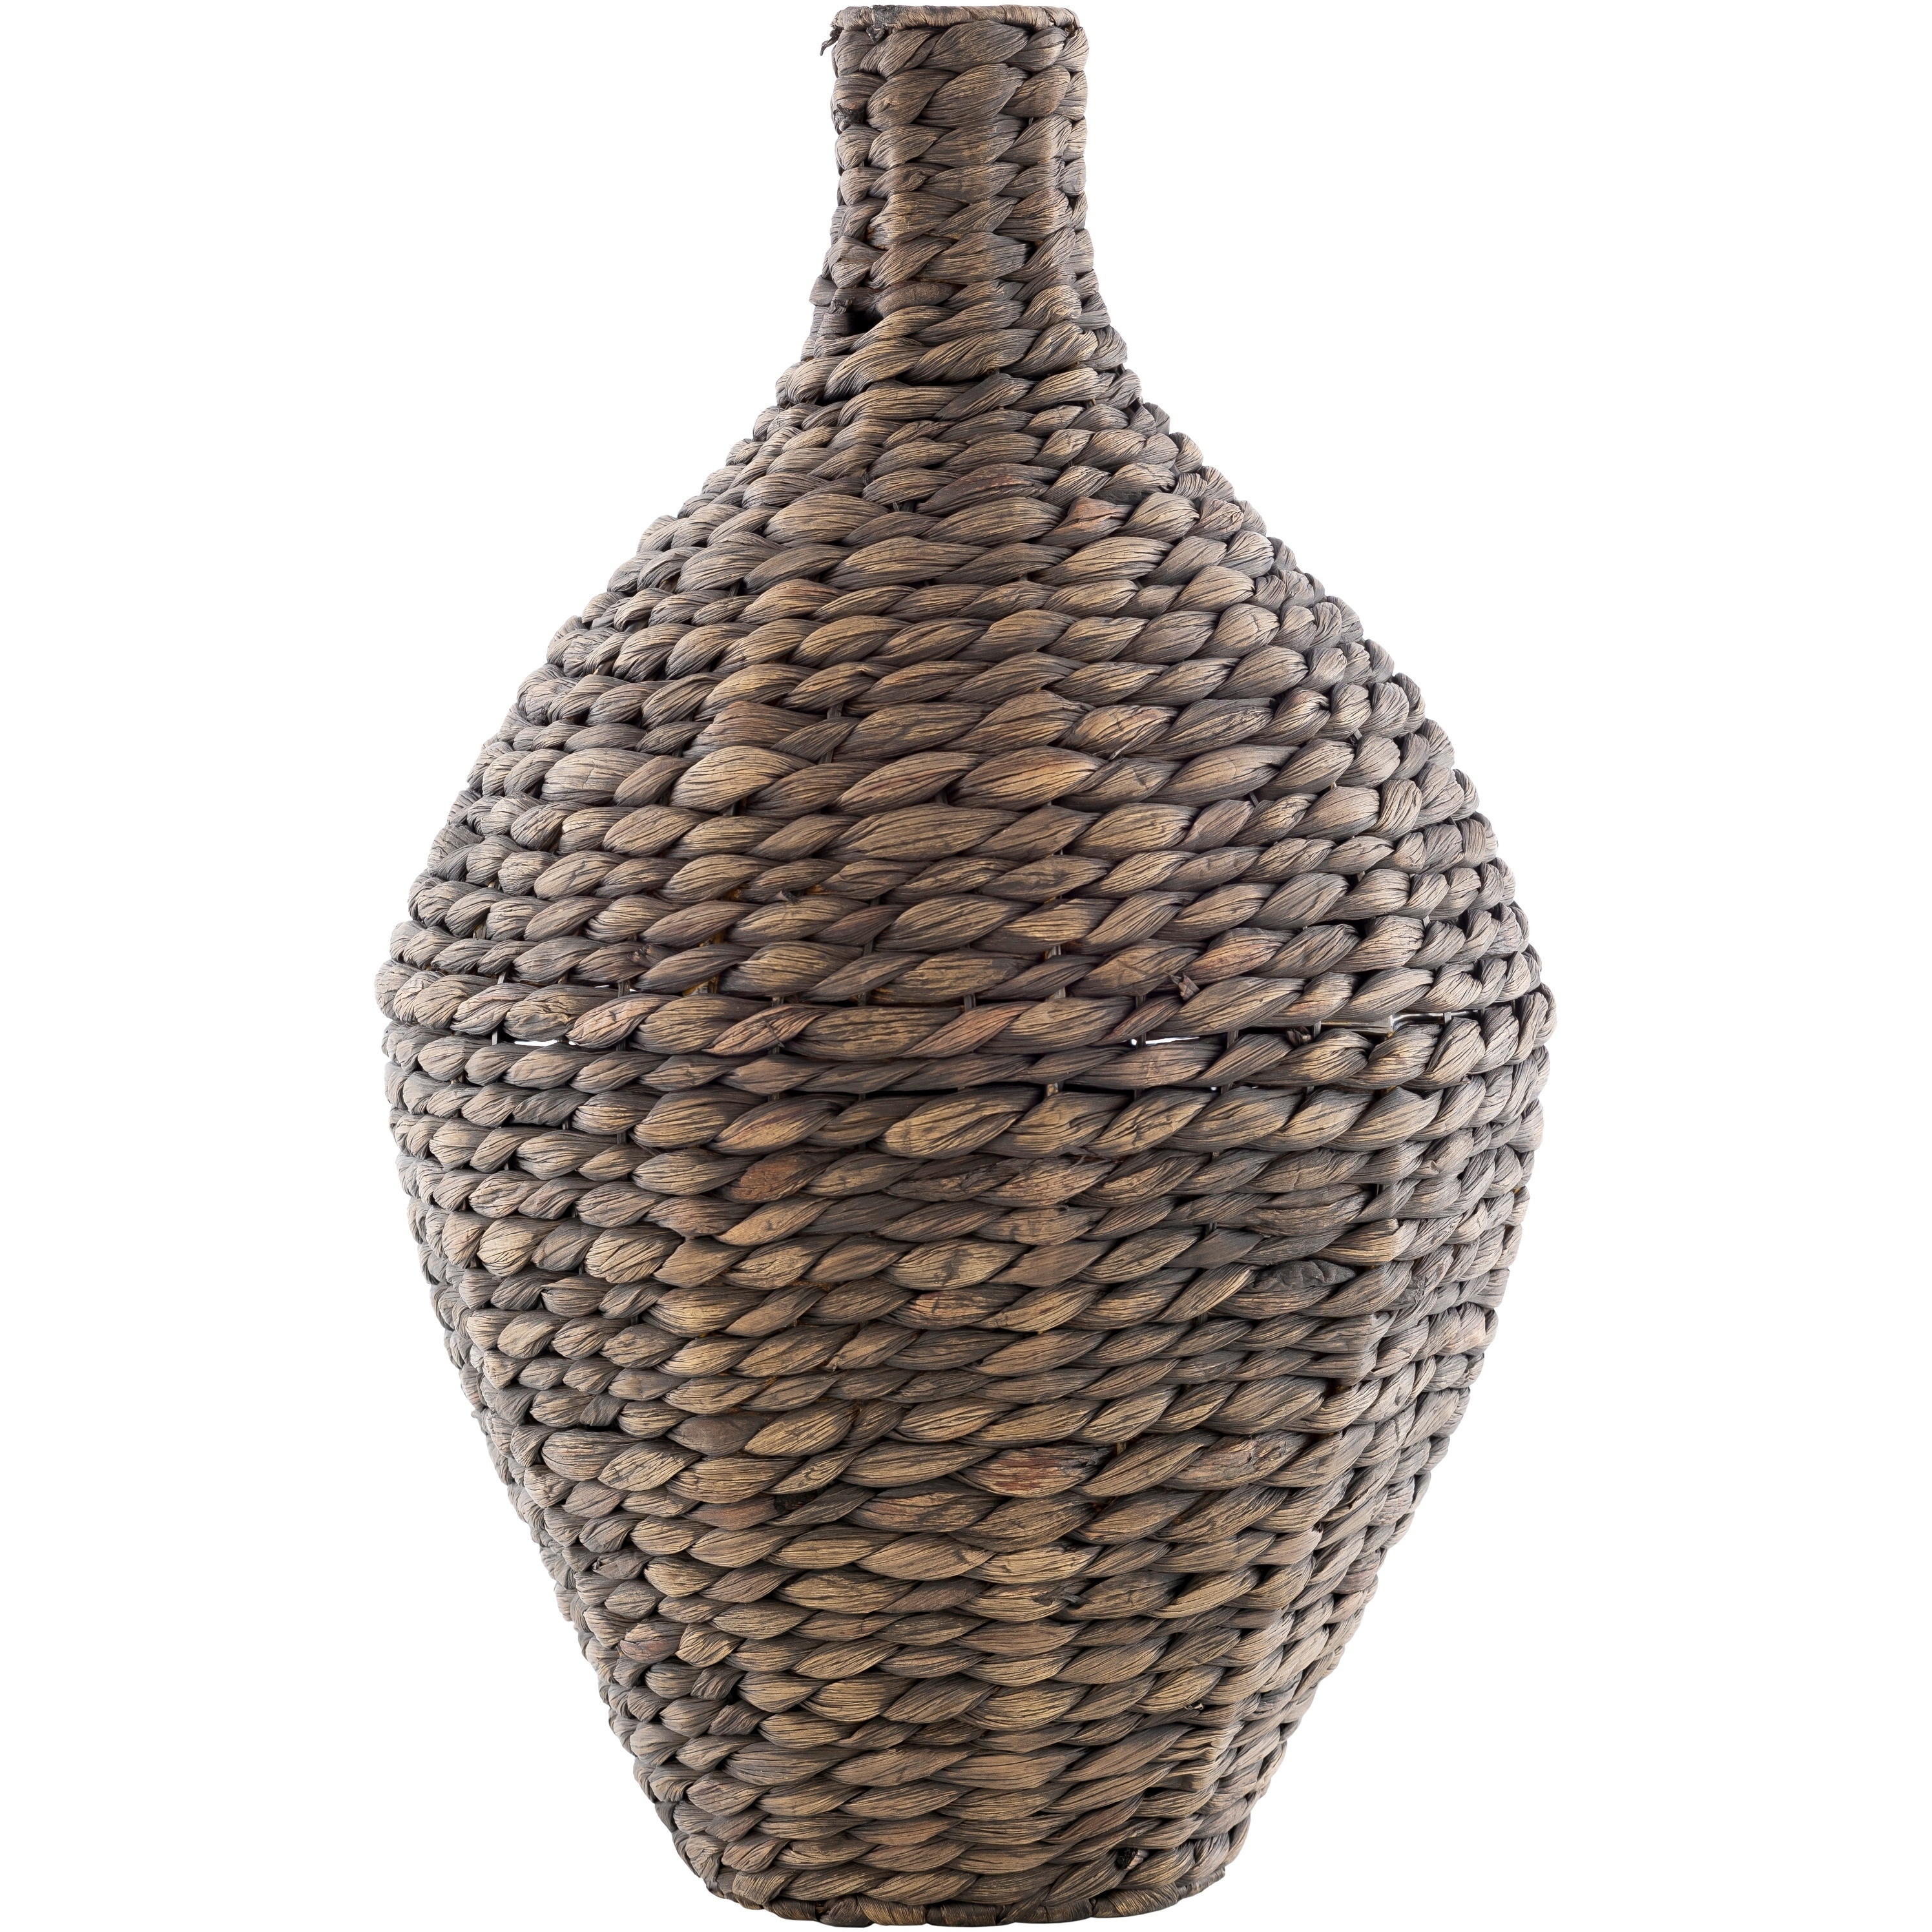 Osorio Bohemian Seagrass And Iron Bud Shaped Floor Vase Overstock 29613361